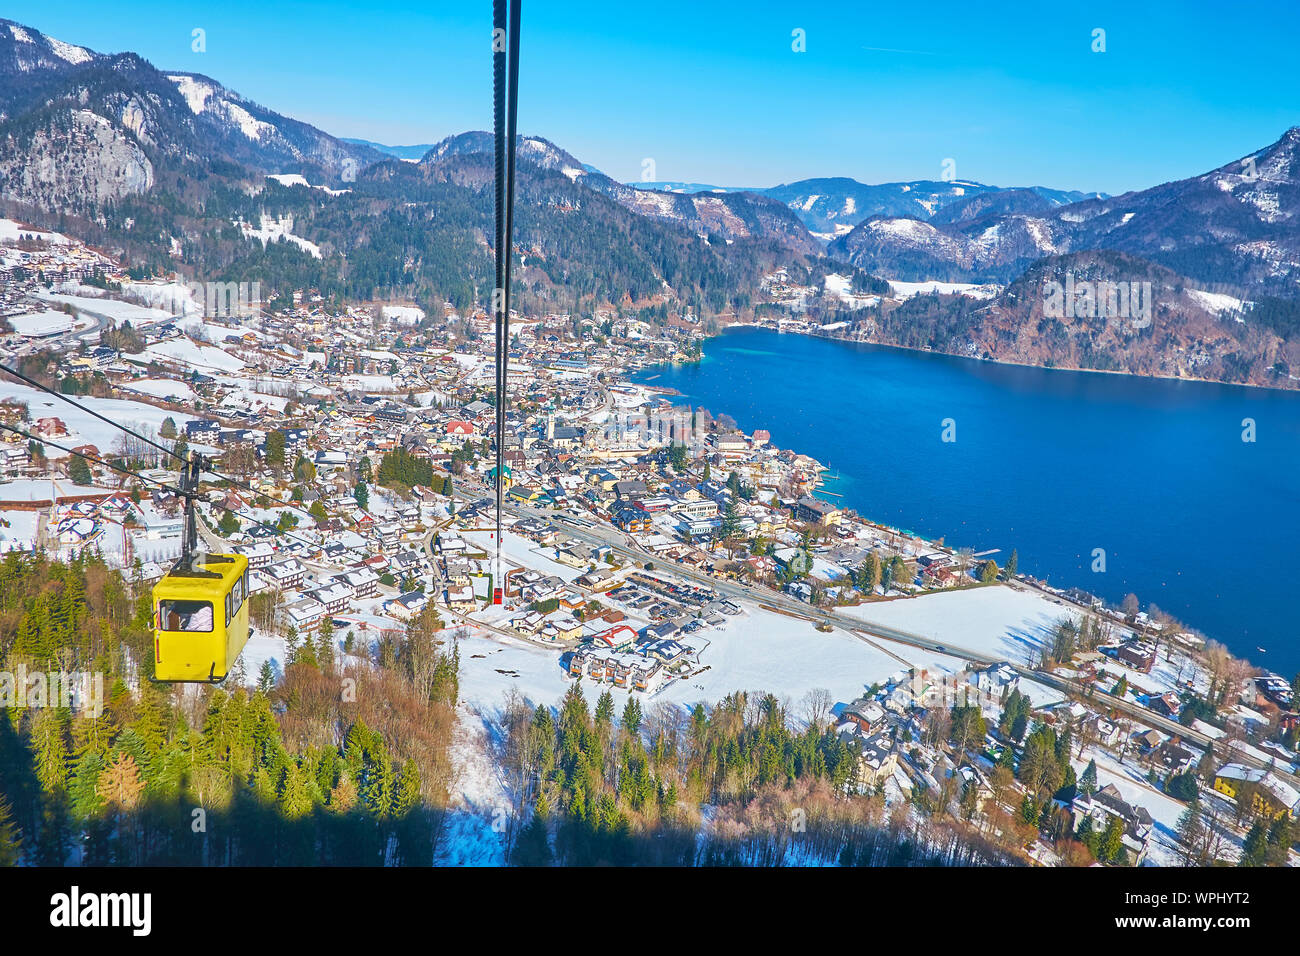 The cable car journey to Zwolferhorn mountain top over the tourist village of St Gilgen and scenic Wolfgangsee lake, Salzkammergut, Austria Stock Photo